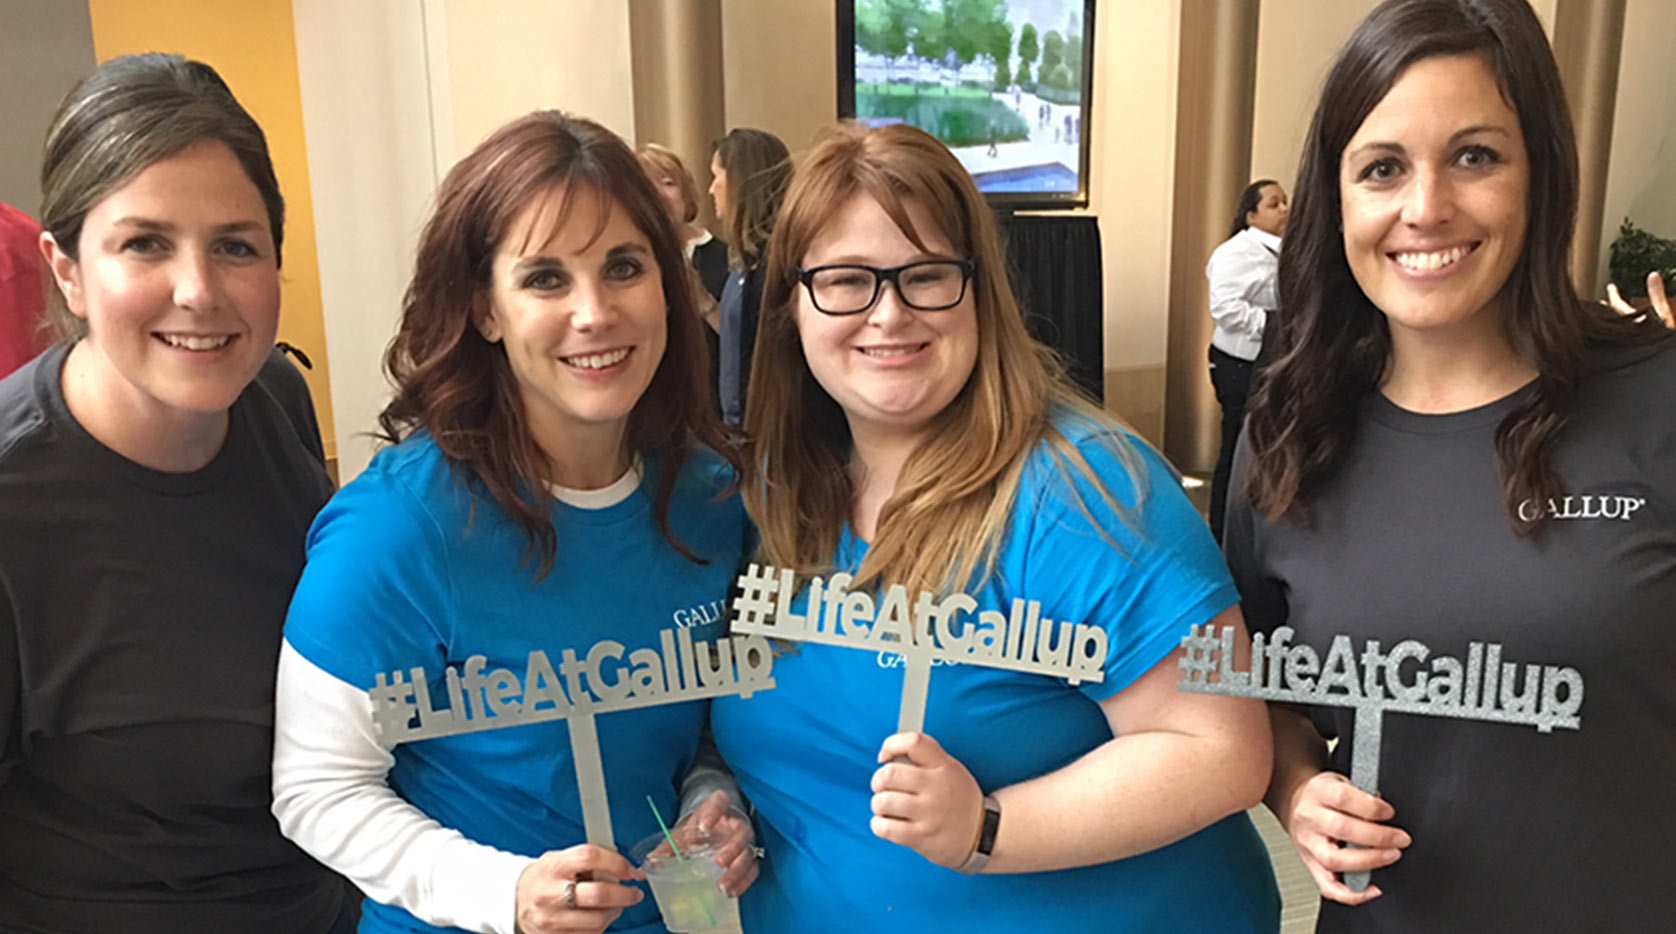 A group of four women employees with #LifeAtGallup signs.